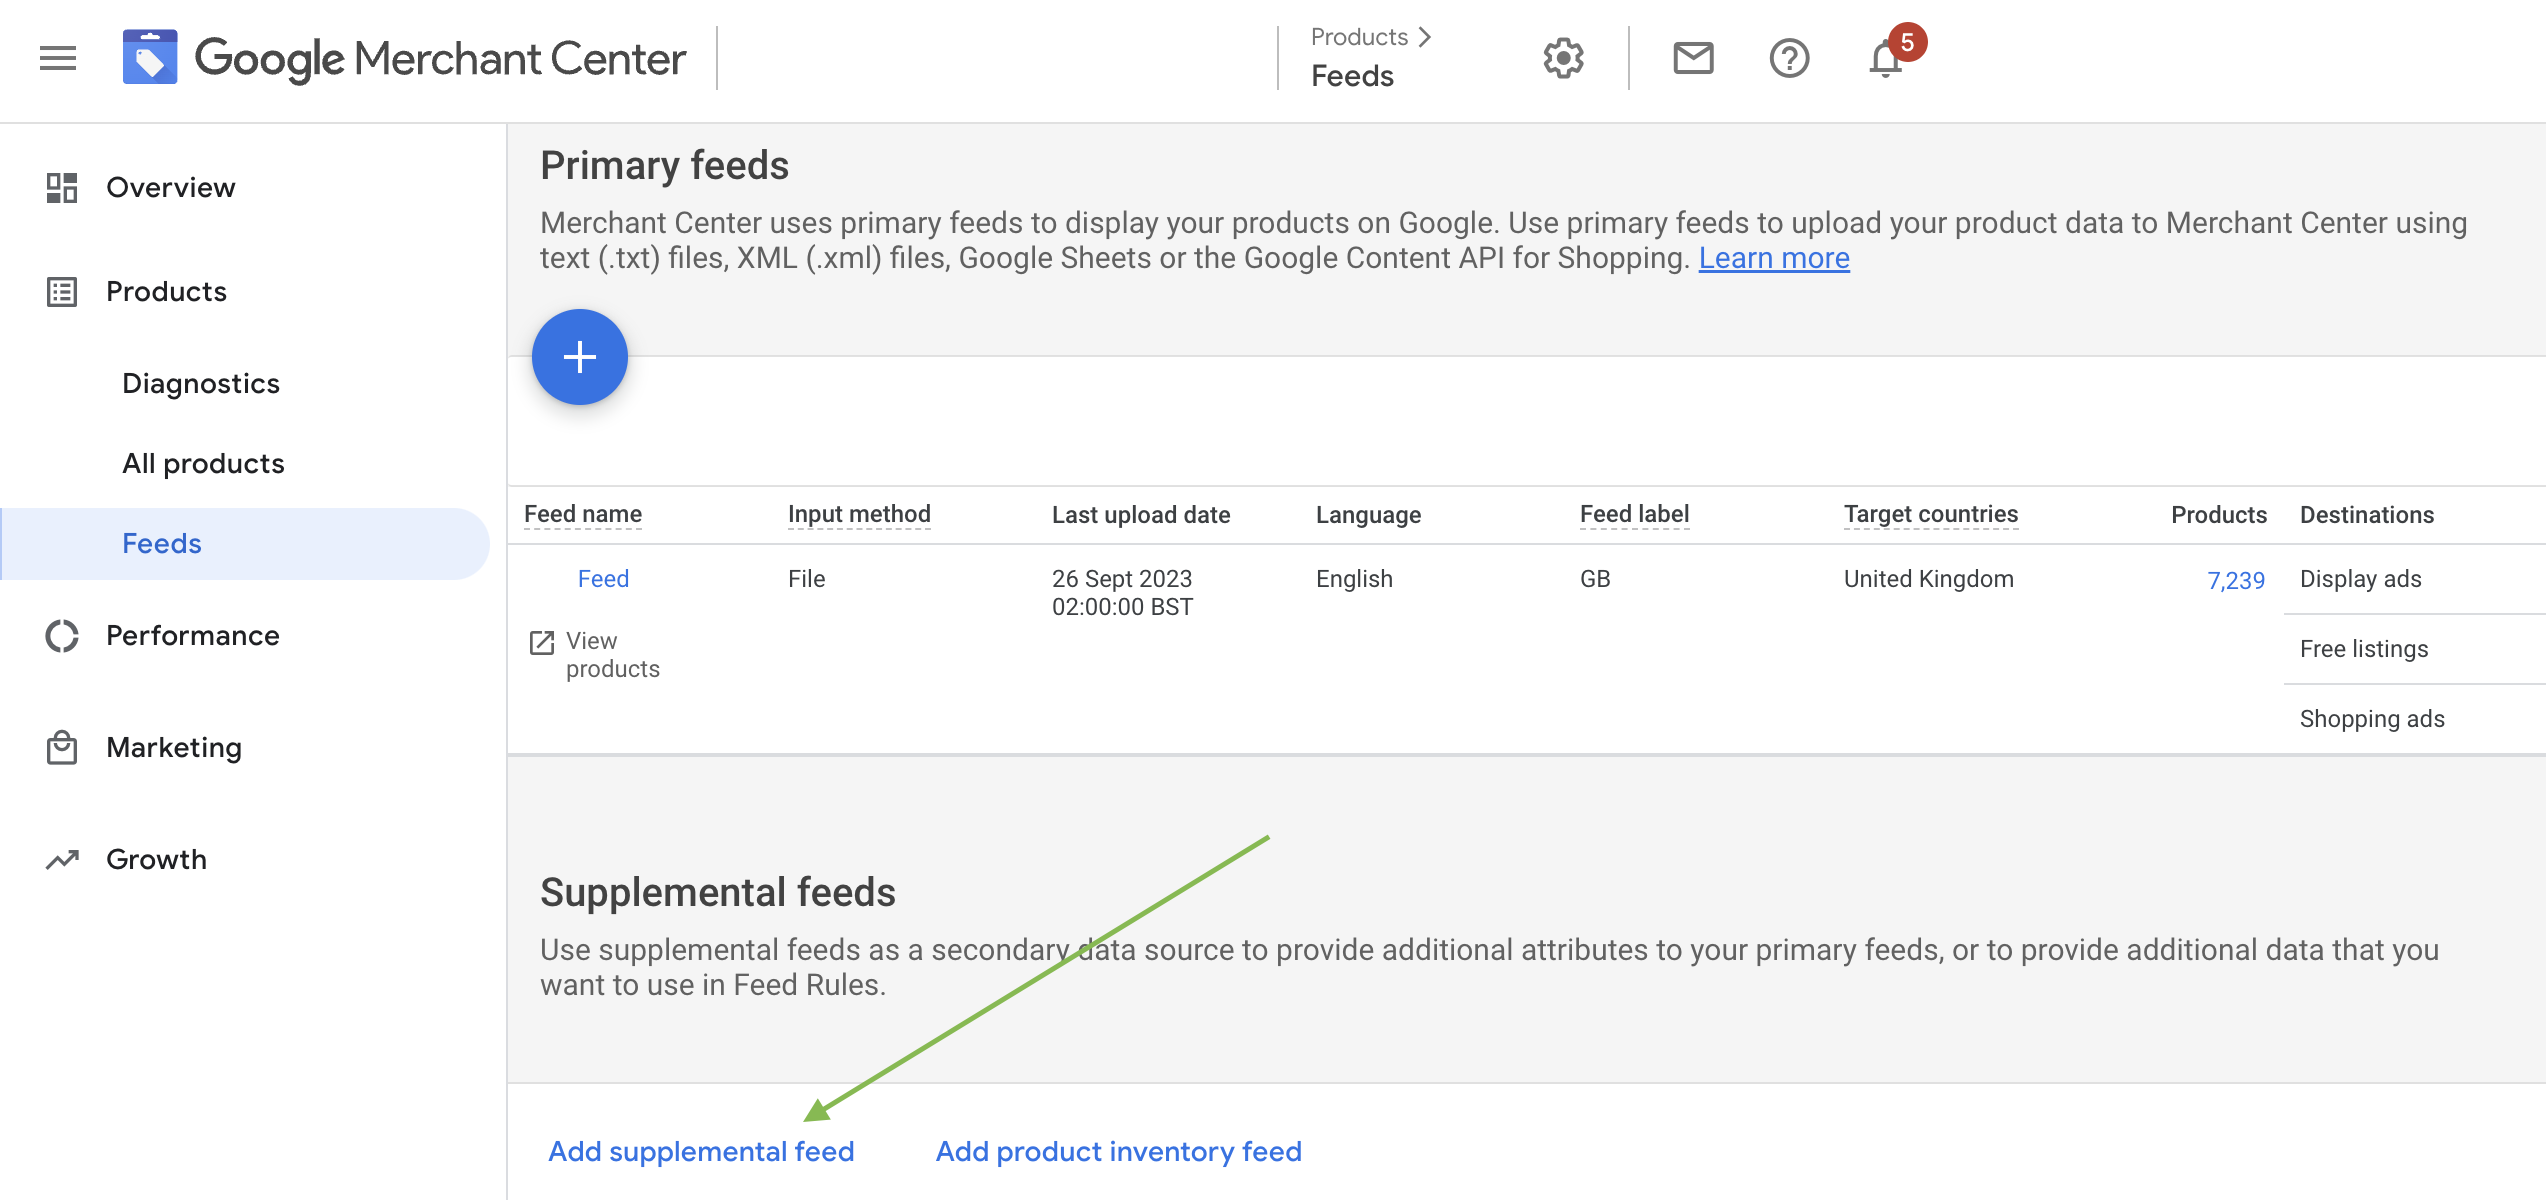 Screenshot of where to add supplemental feed in Merchant Center interface